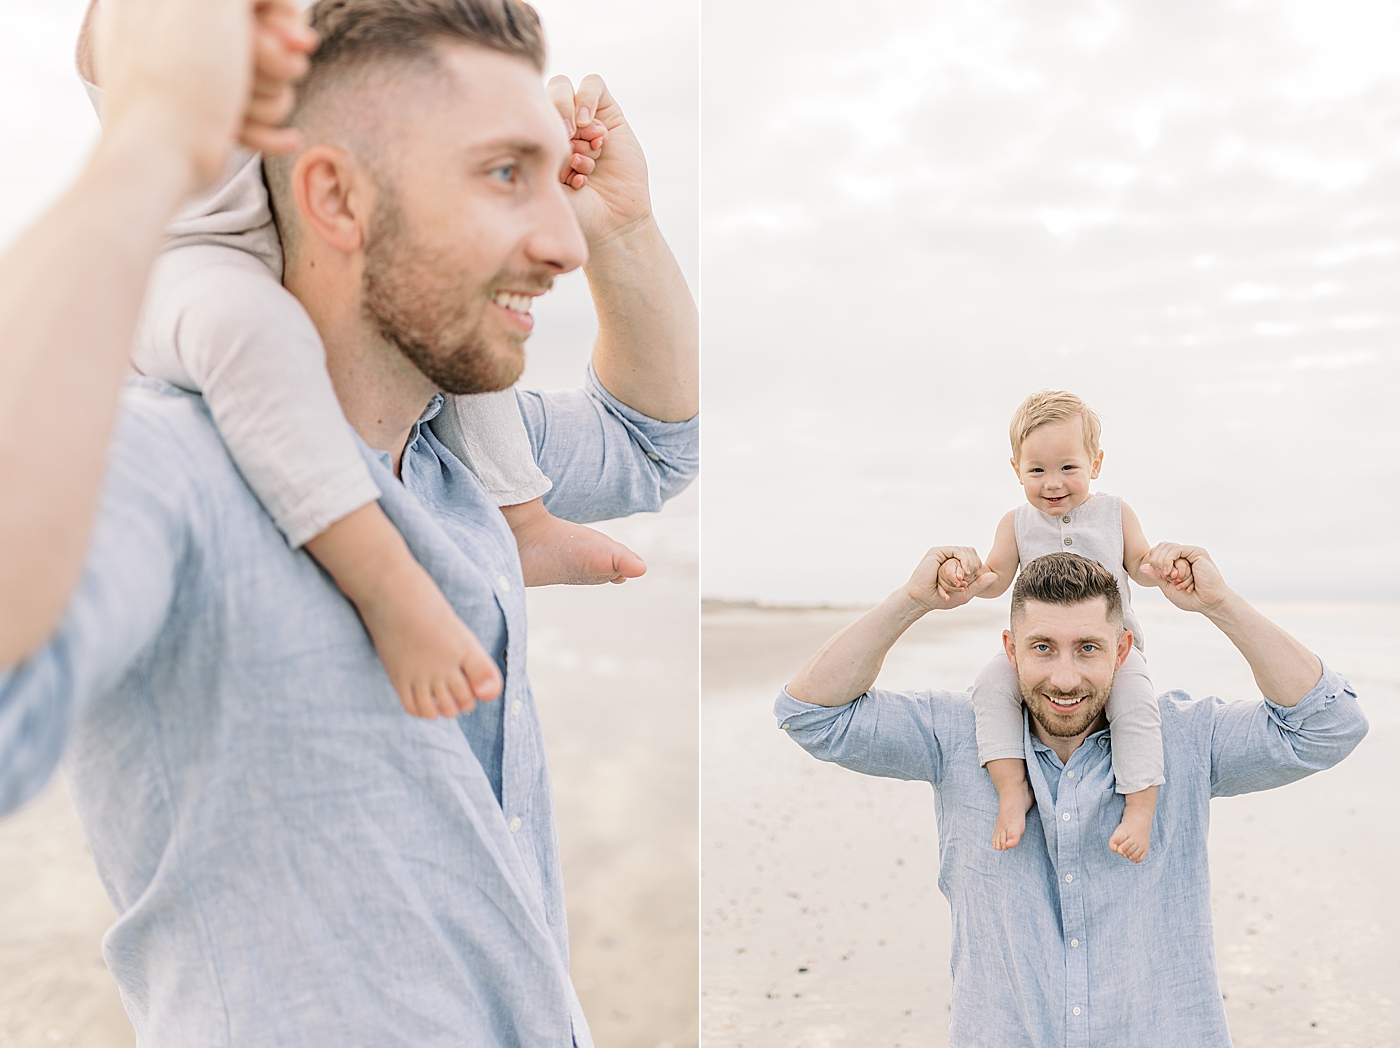 Dad with baby boy on his shoulders | Image by Caitlyn Motycka